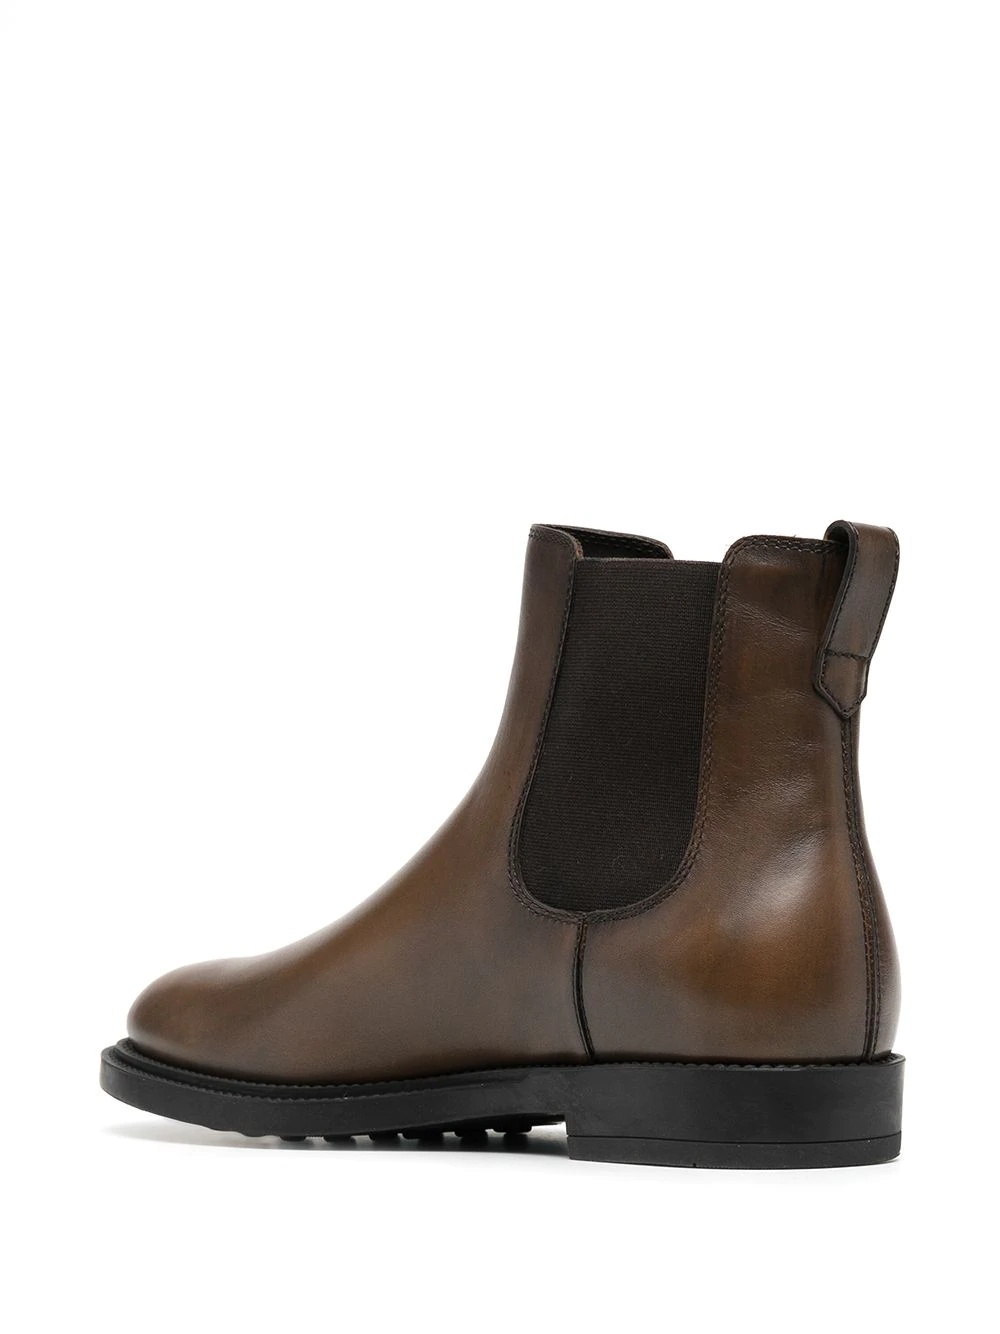 round toe chelsea boots - 3